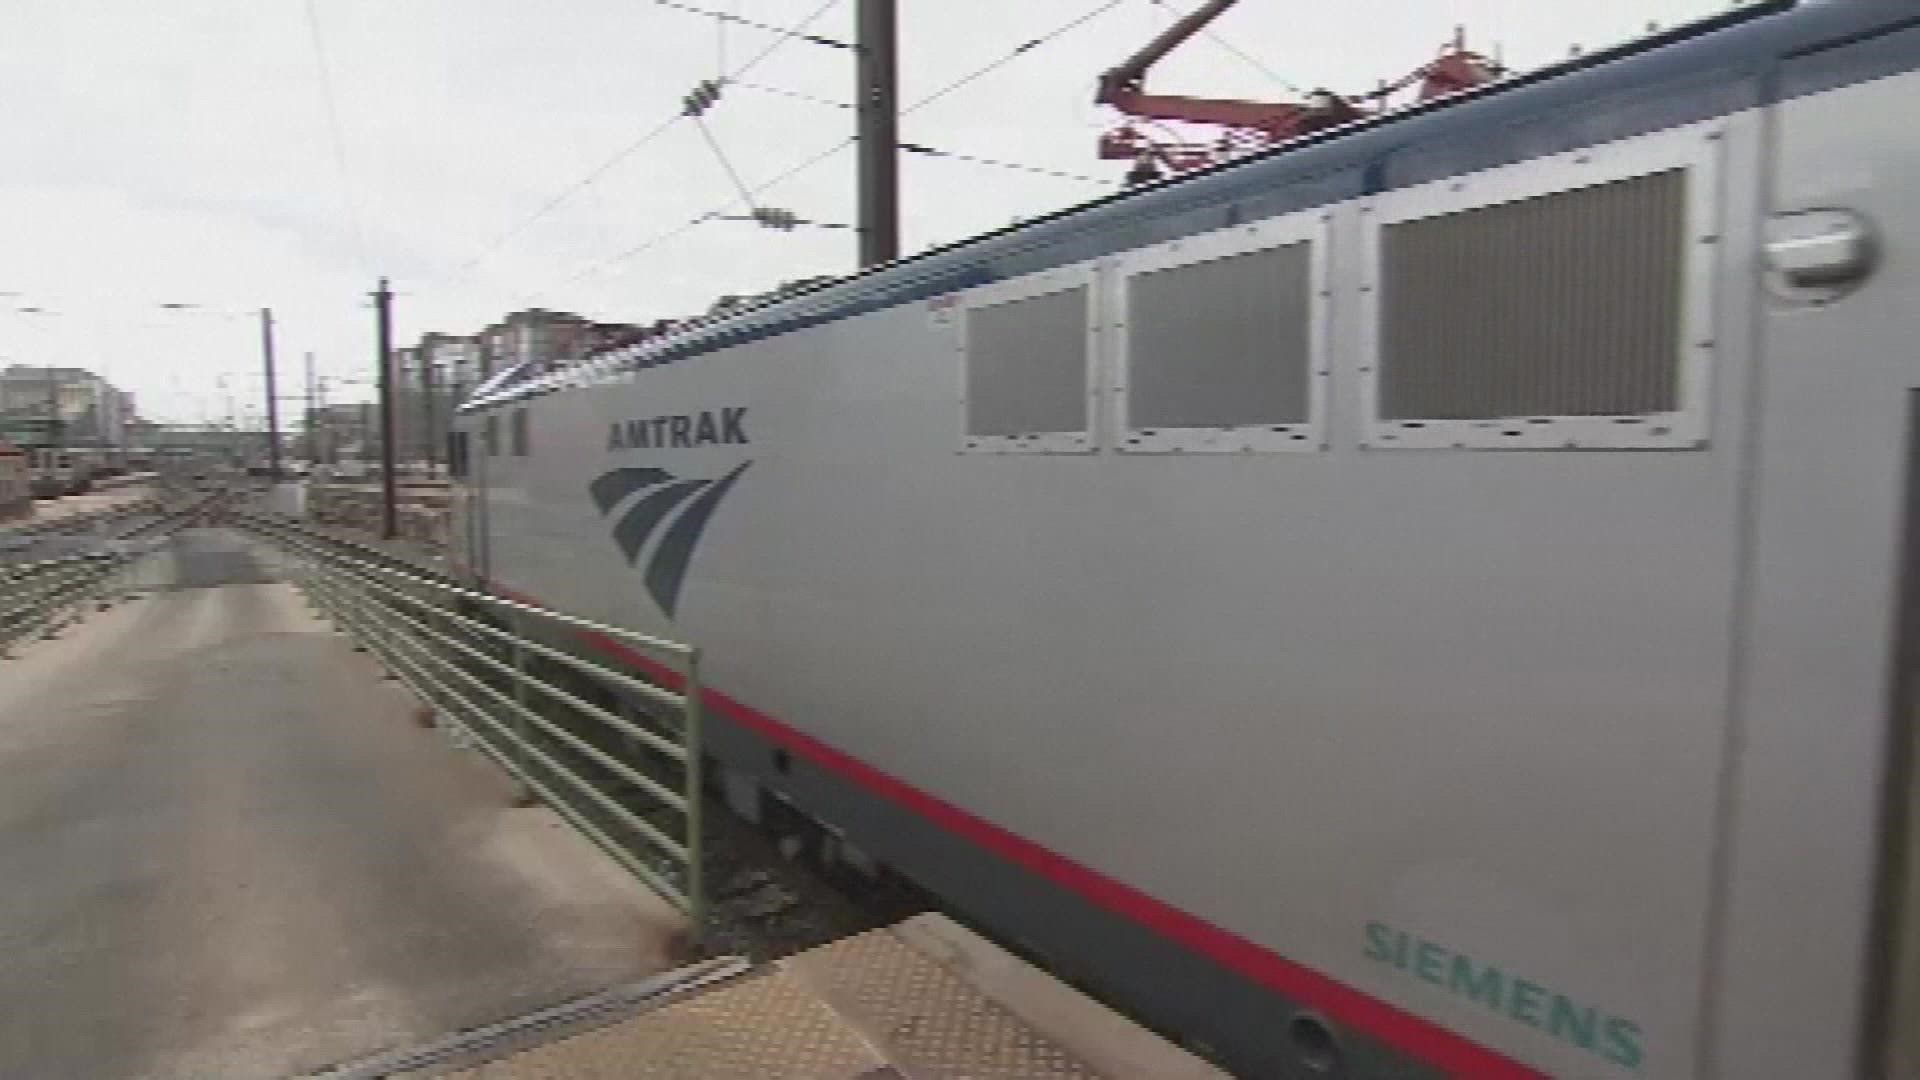 A possible strike involving freight railroads has started to impact commuter rail operations.